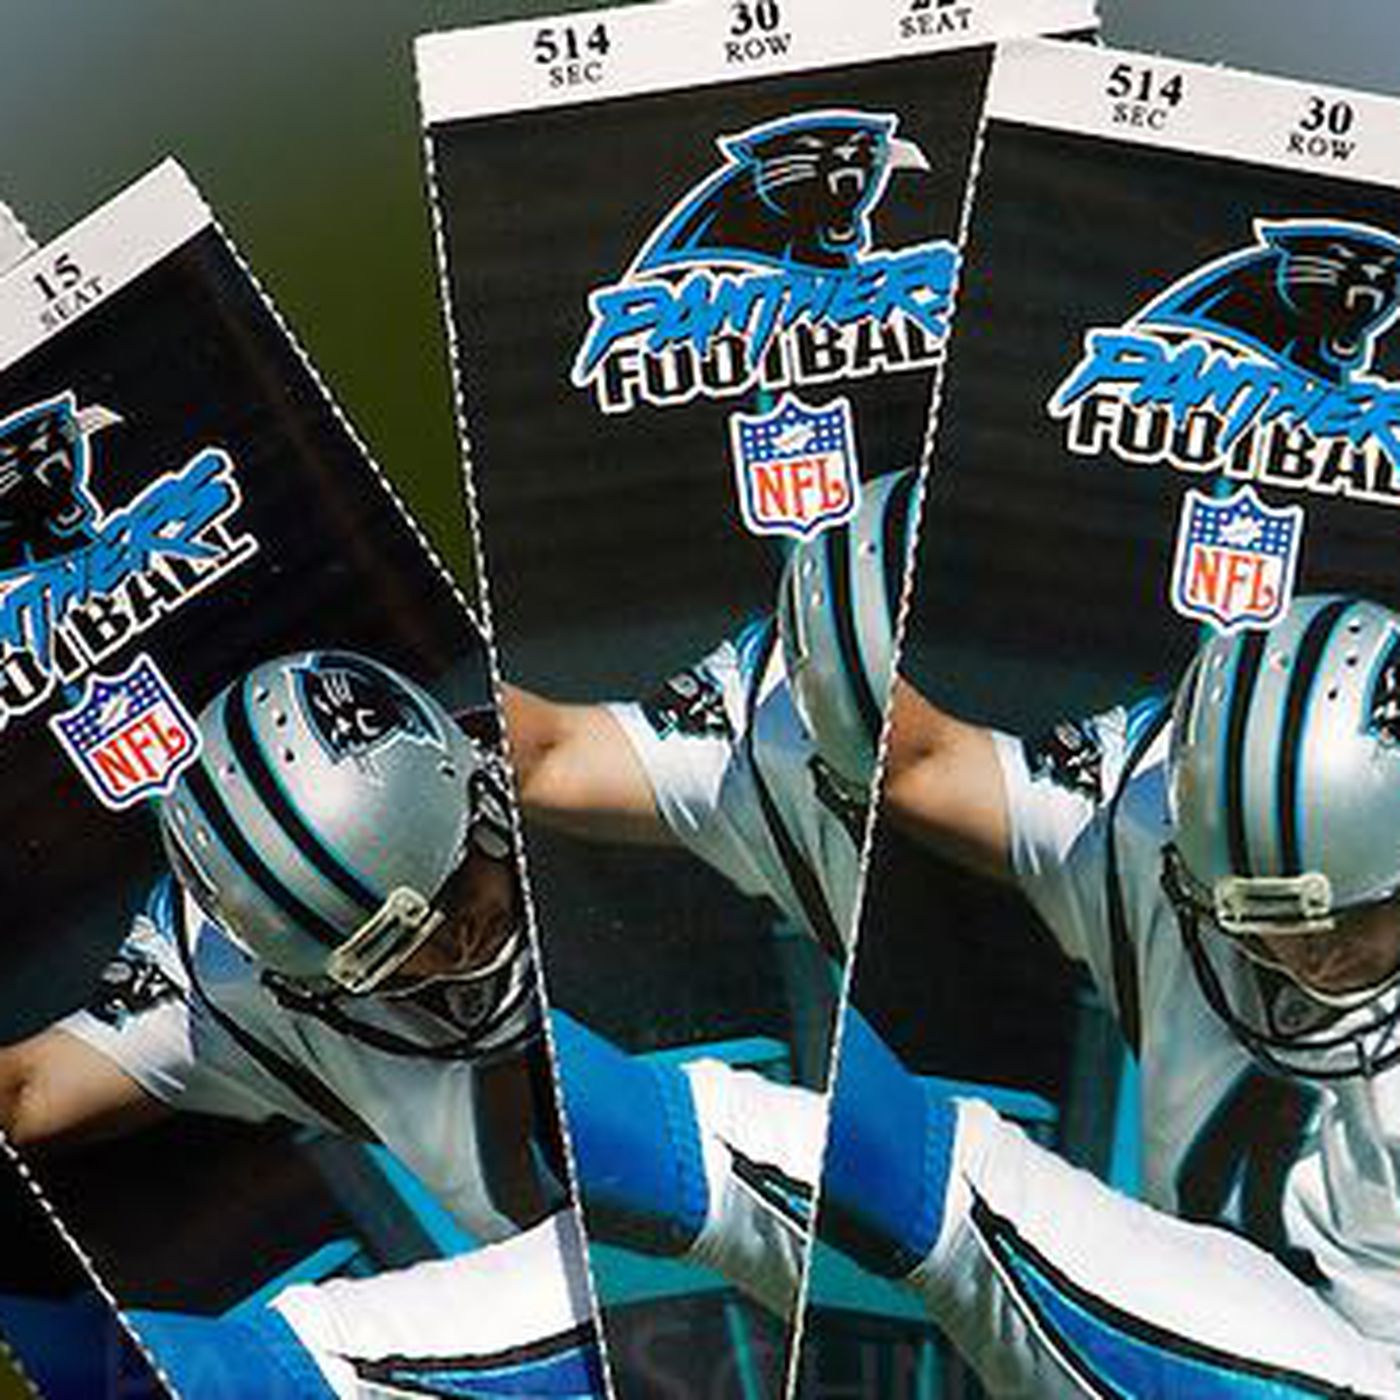 Carolina Panthers now 9th in NFL in average ticket price - Cat